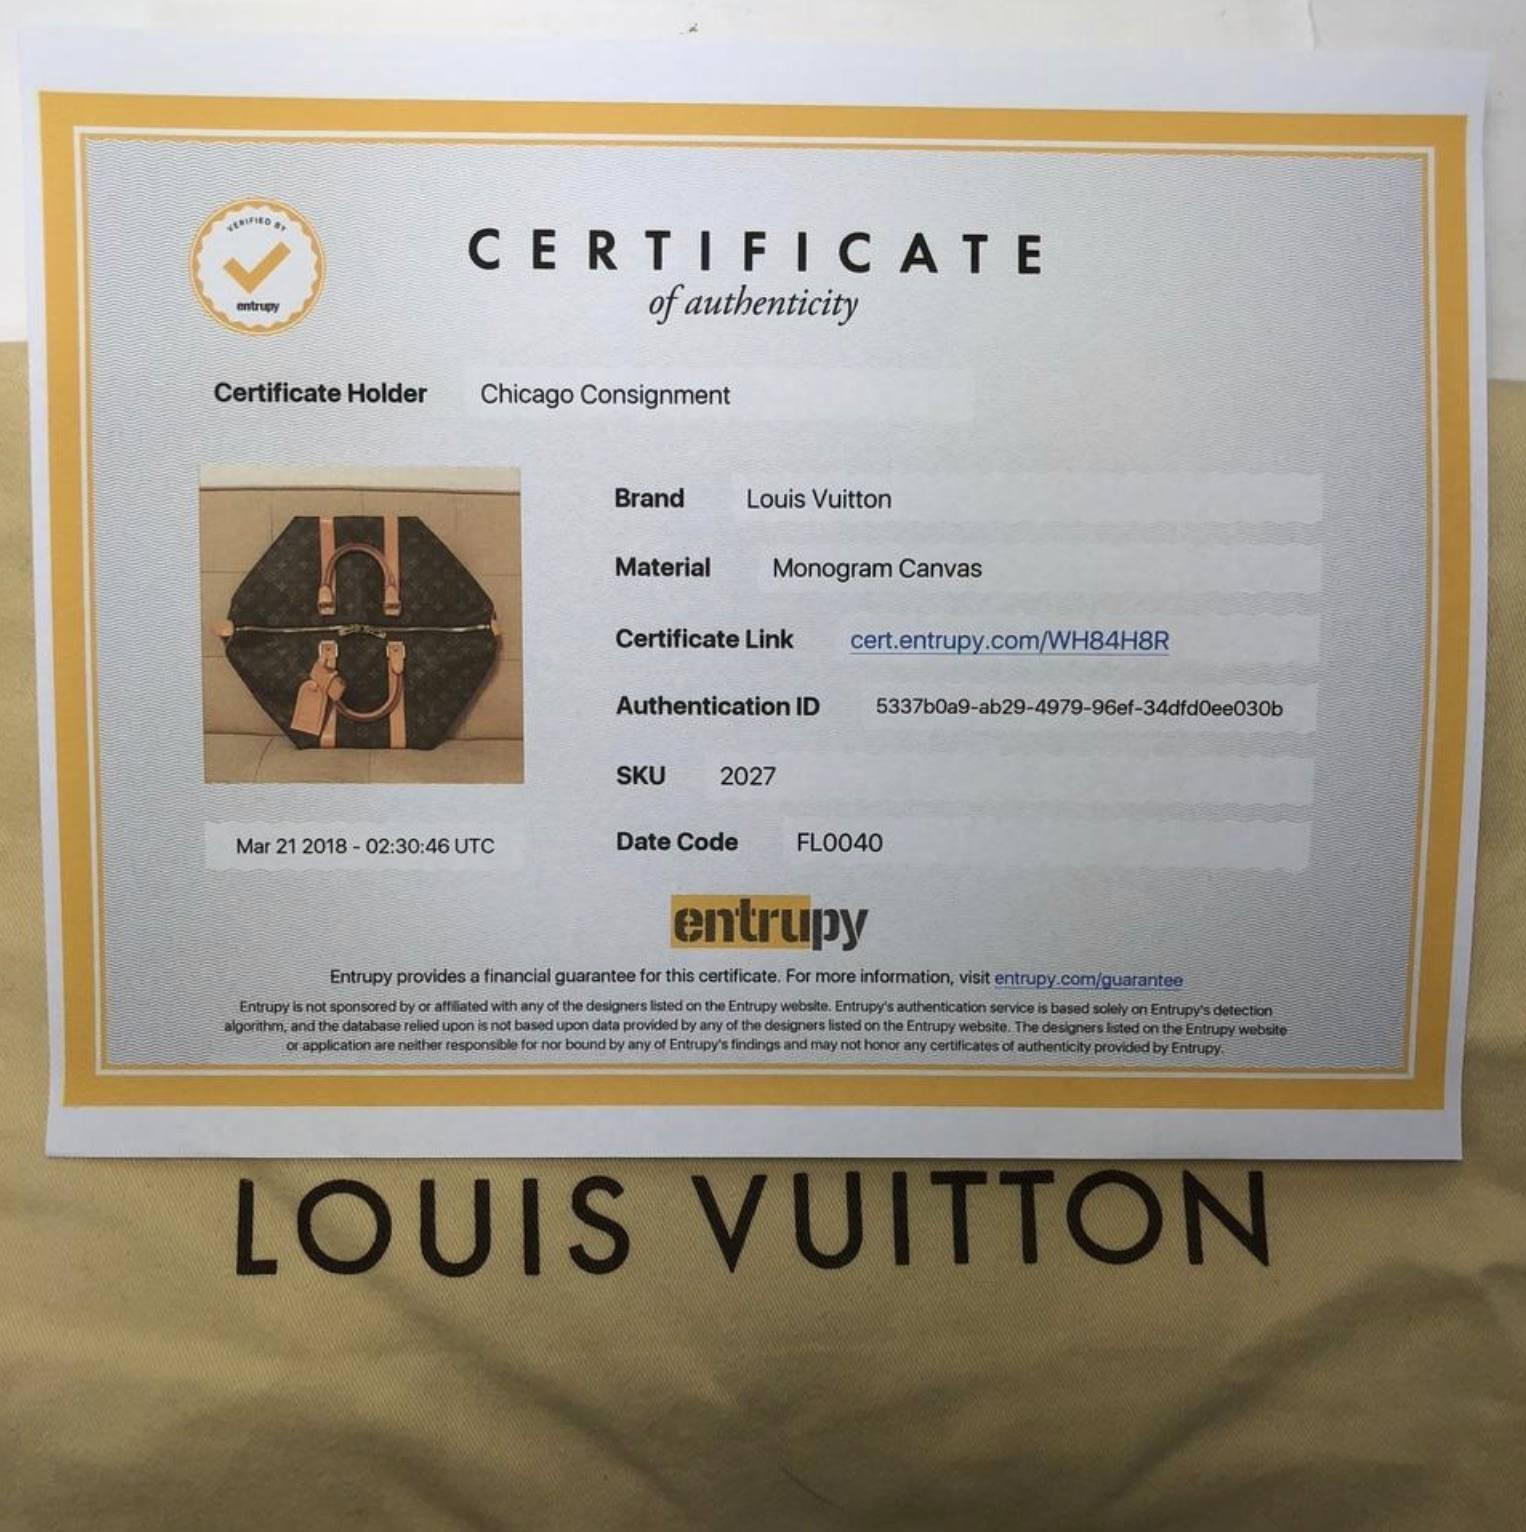 MODEL - Louis Vuitton Monogram Keepall 45

CONDITION - Very Good. Light to medium vachette with no watermarks, minor scuffing, no dryness and no cracking. Bright and shiny hardware with no tarnishing or chipping. No rips, holes, tears or odors. Ink